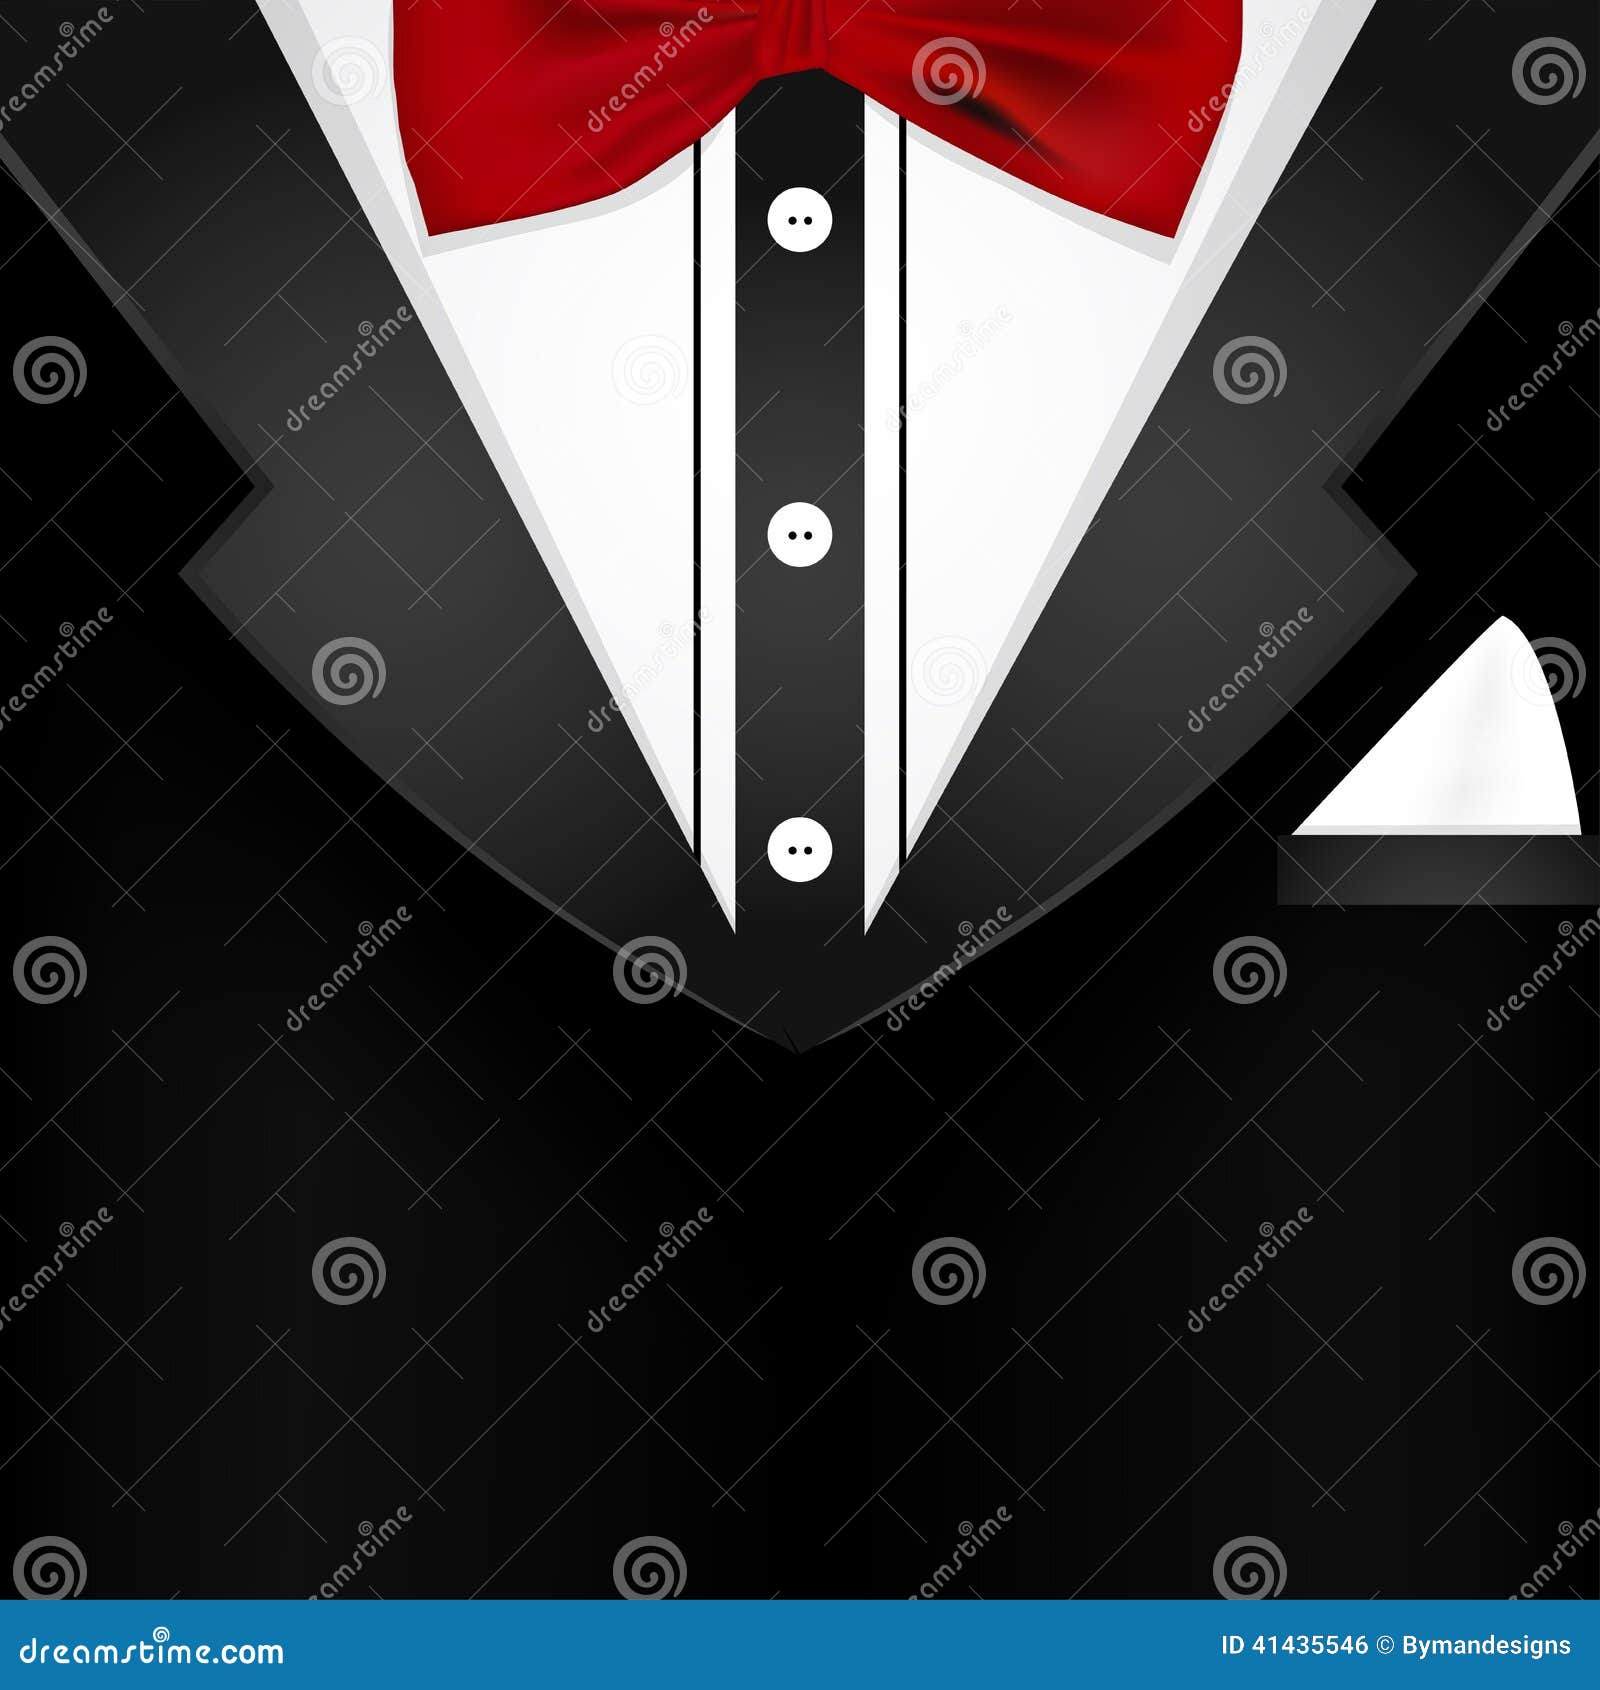 Business Tuxedo Background With A Red Bow Tie And Stock Vector - Image ...